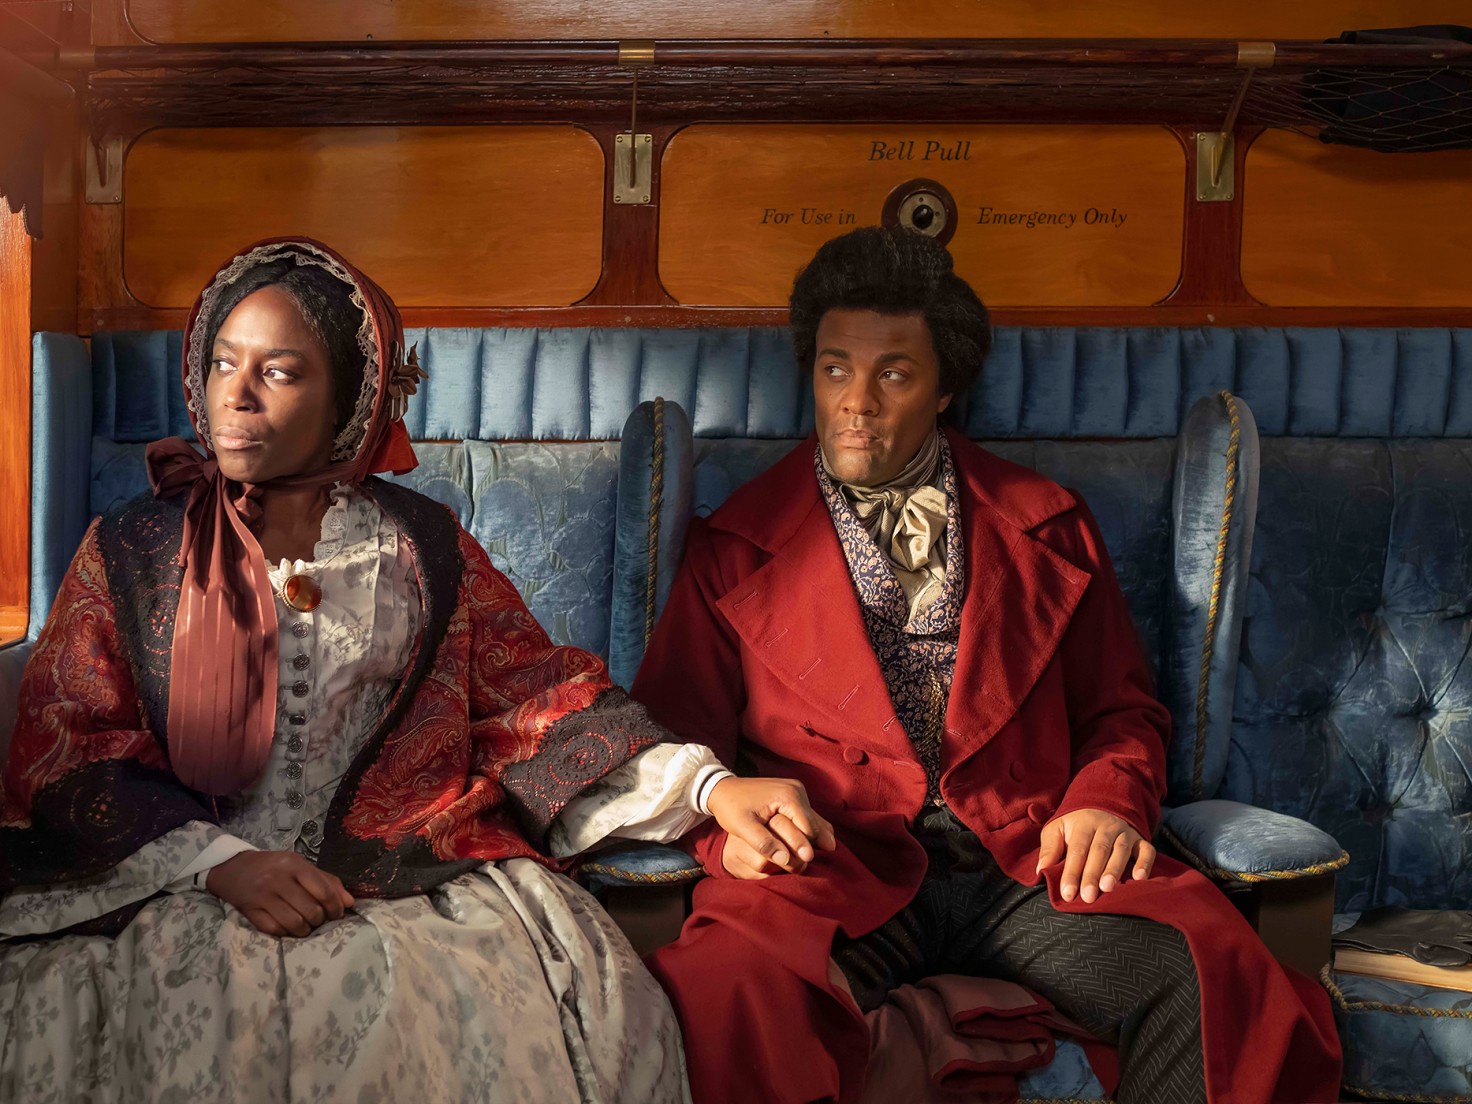 Two Black people sit inside a carriage, dressed in period attire. They both look out the window on the left pensively, the person on the far left - who wears a bonnet and floral dress - has their left hand on the right hand of the person on the right, who is wearing a red overcoat and appears to be portraying Frederick Douglass.